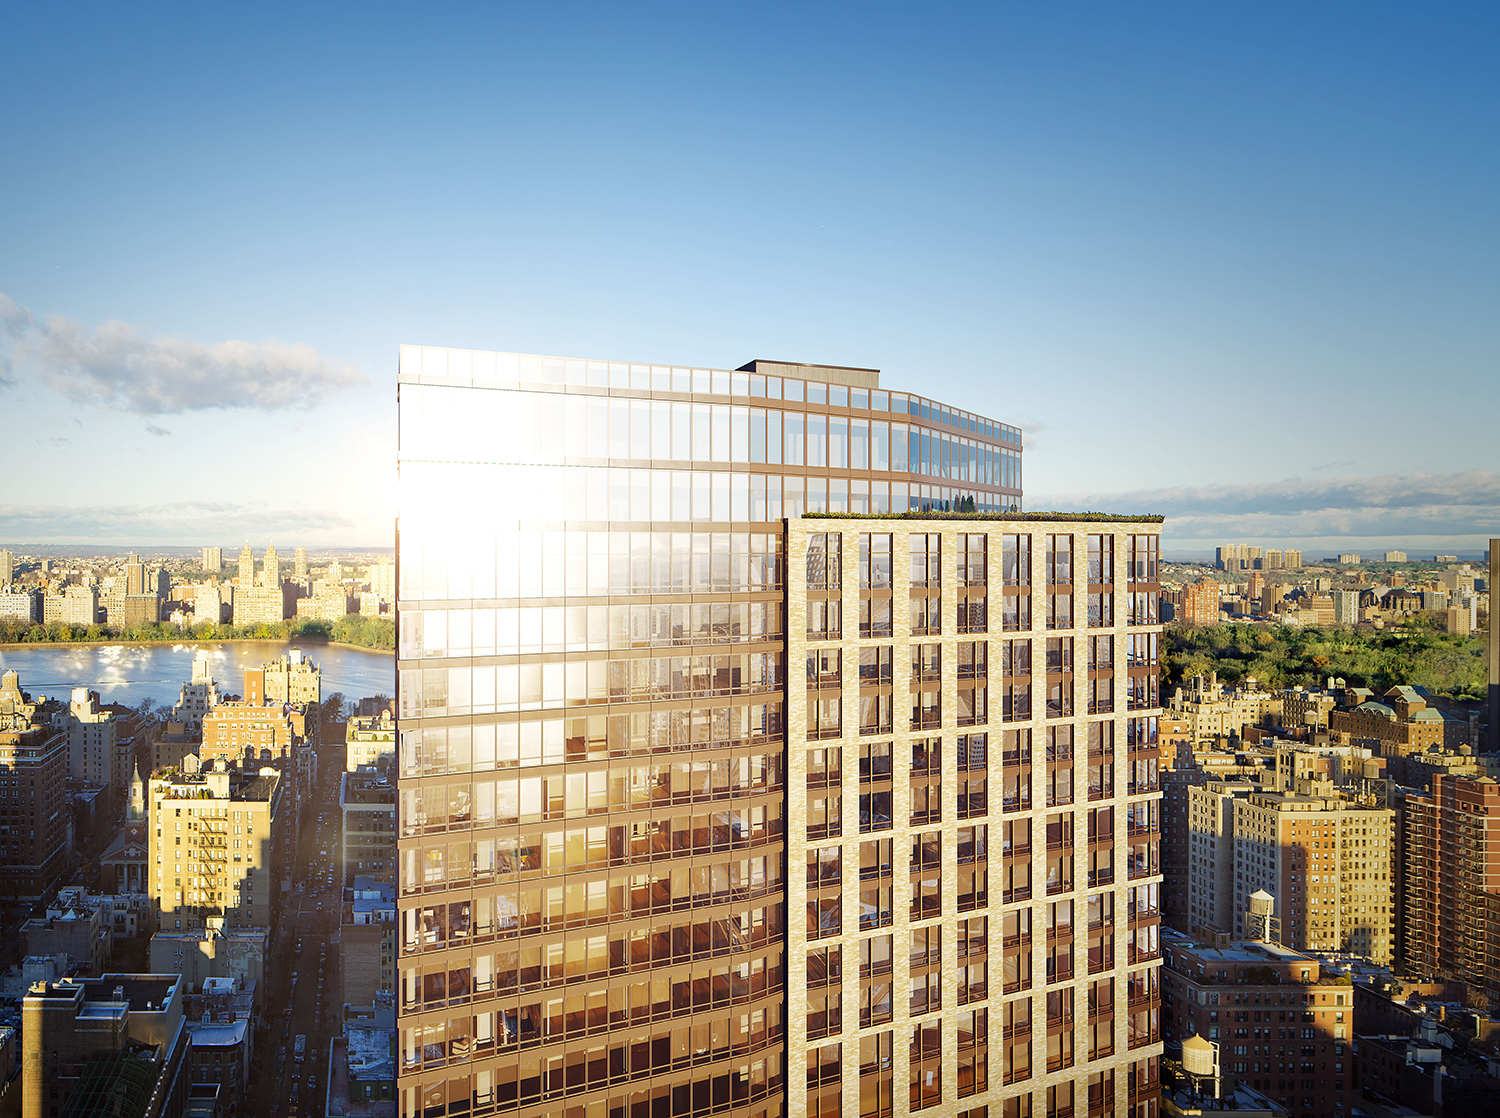 Rendering of the Easton, 205 East 92nd Street. Designed by Handel Architects. Rendering by Moso Studio